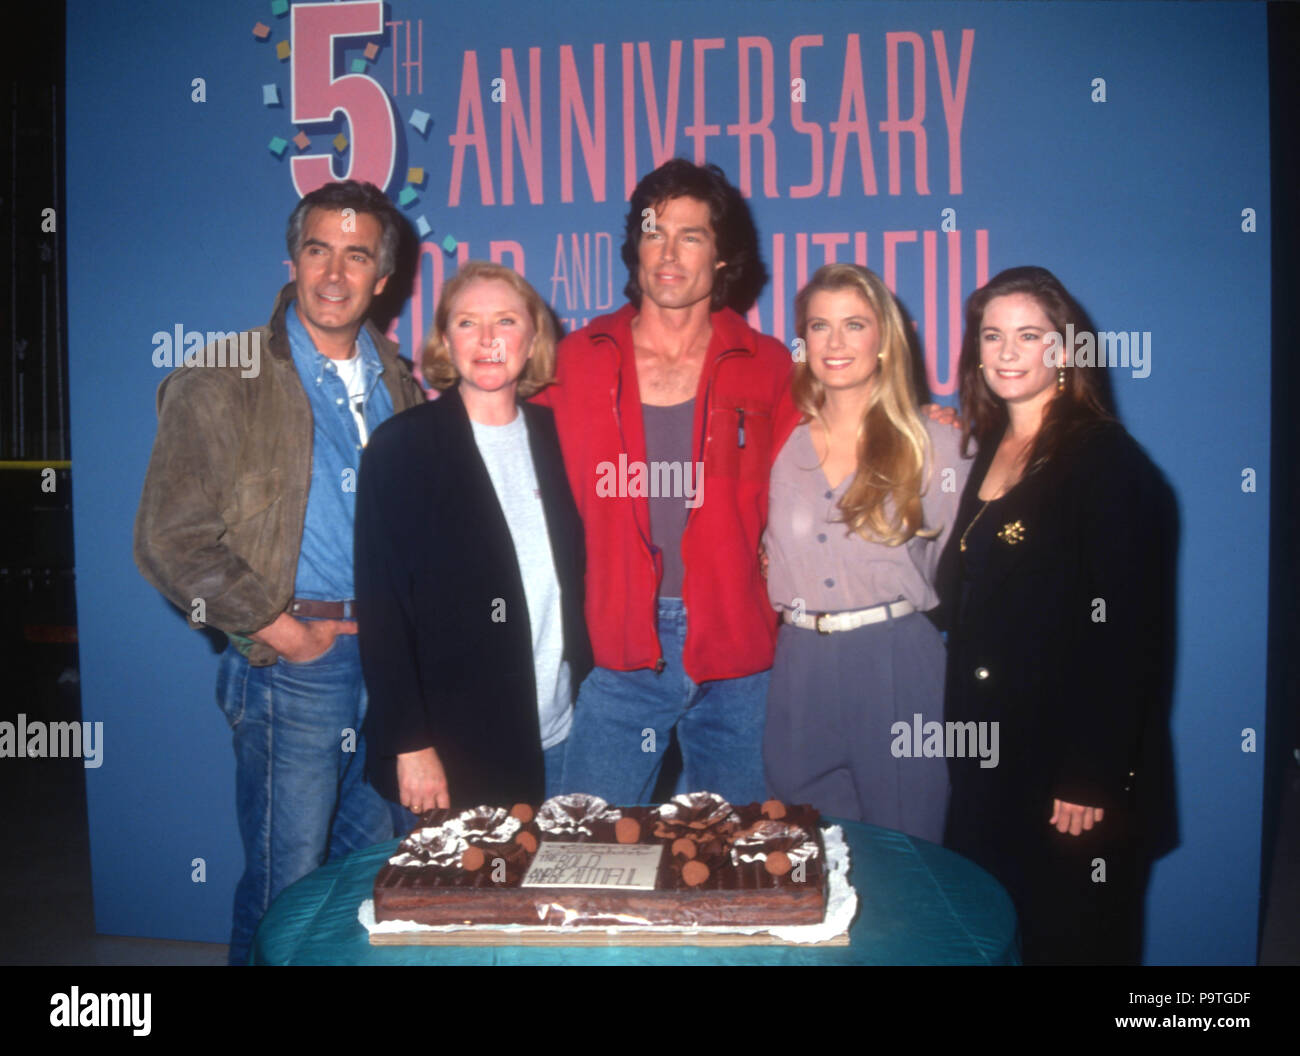 LOS ANGELES, CA - MARCH 23: (L-R) Actor John McCook, actress Susan Flannery, actor Ronn Moss, actresses Katherine Kelly Lang and Joanna Johnson attend 5th Anniversary Celebration for 'The Bold and the Beautiful' soap opera on March 23, 1992 at CBS Television City in Los Angeles, California. Photo by Barry King/Alamy Stock Photo Stock Photo